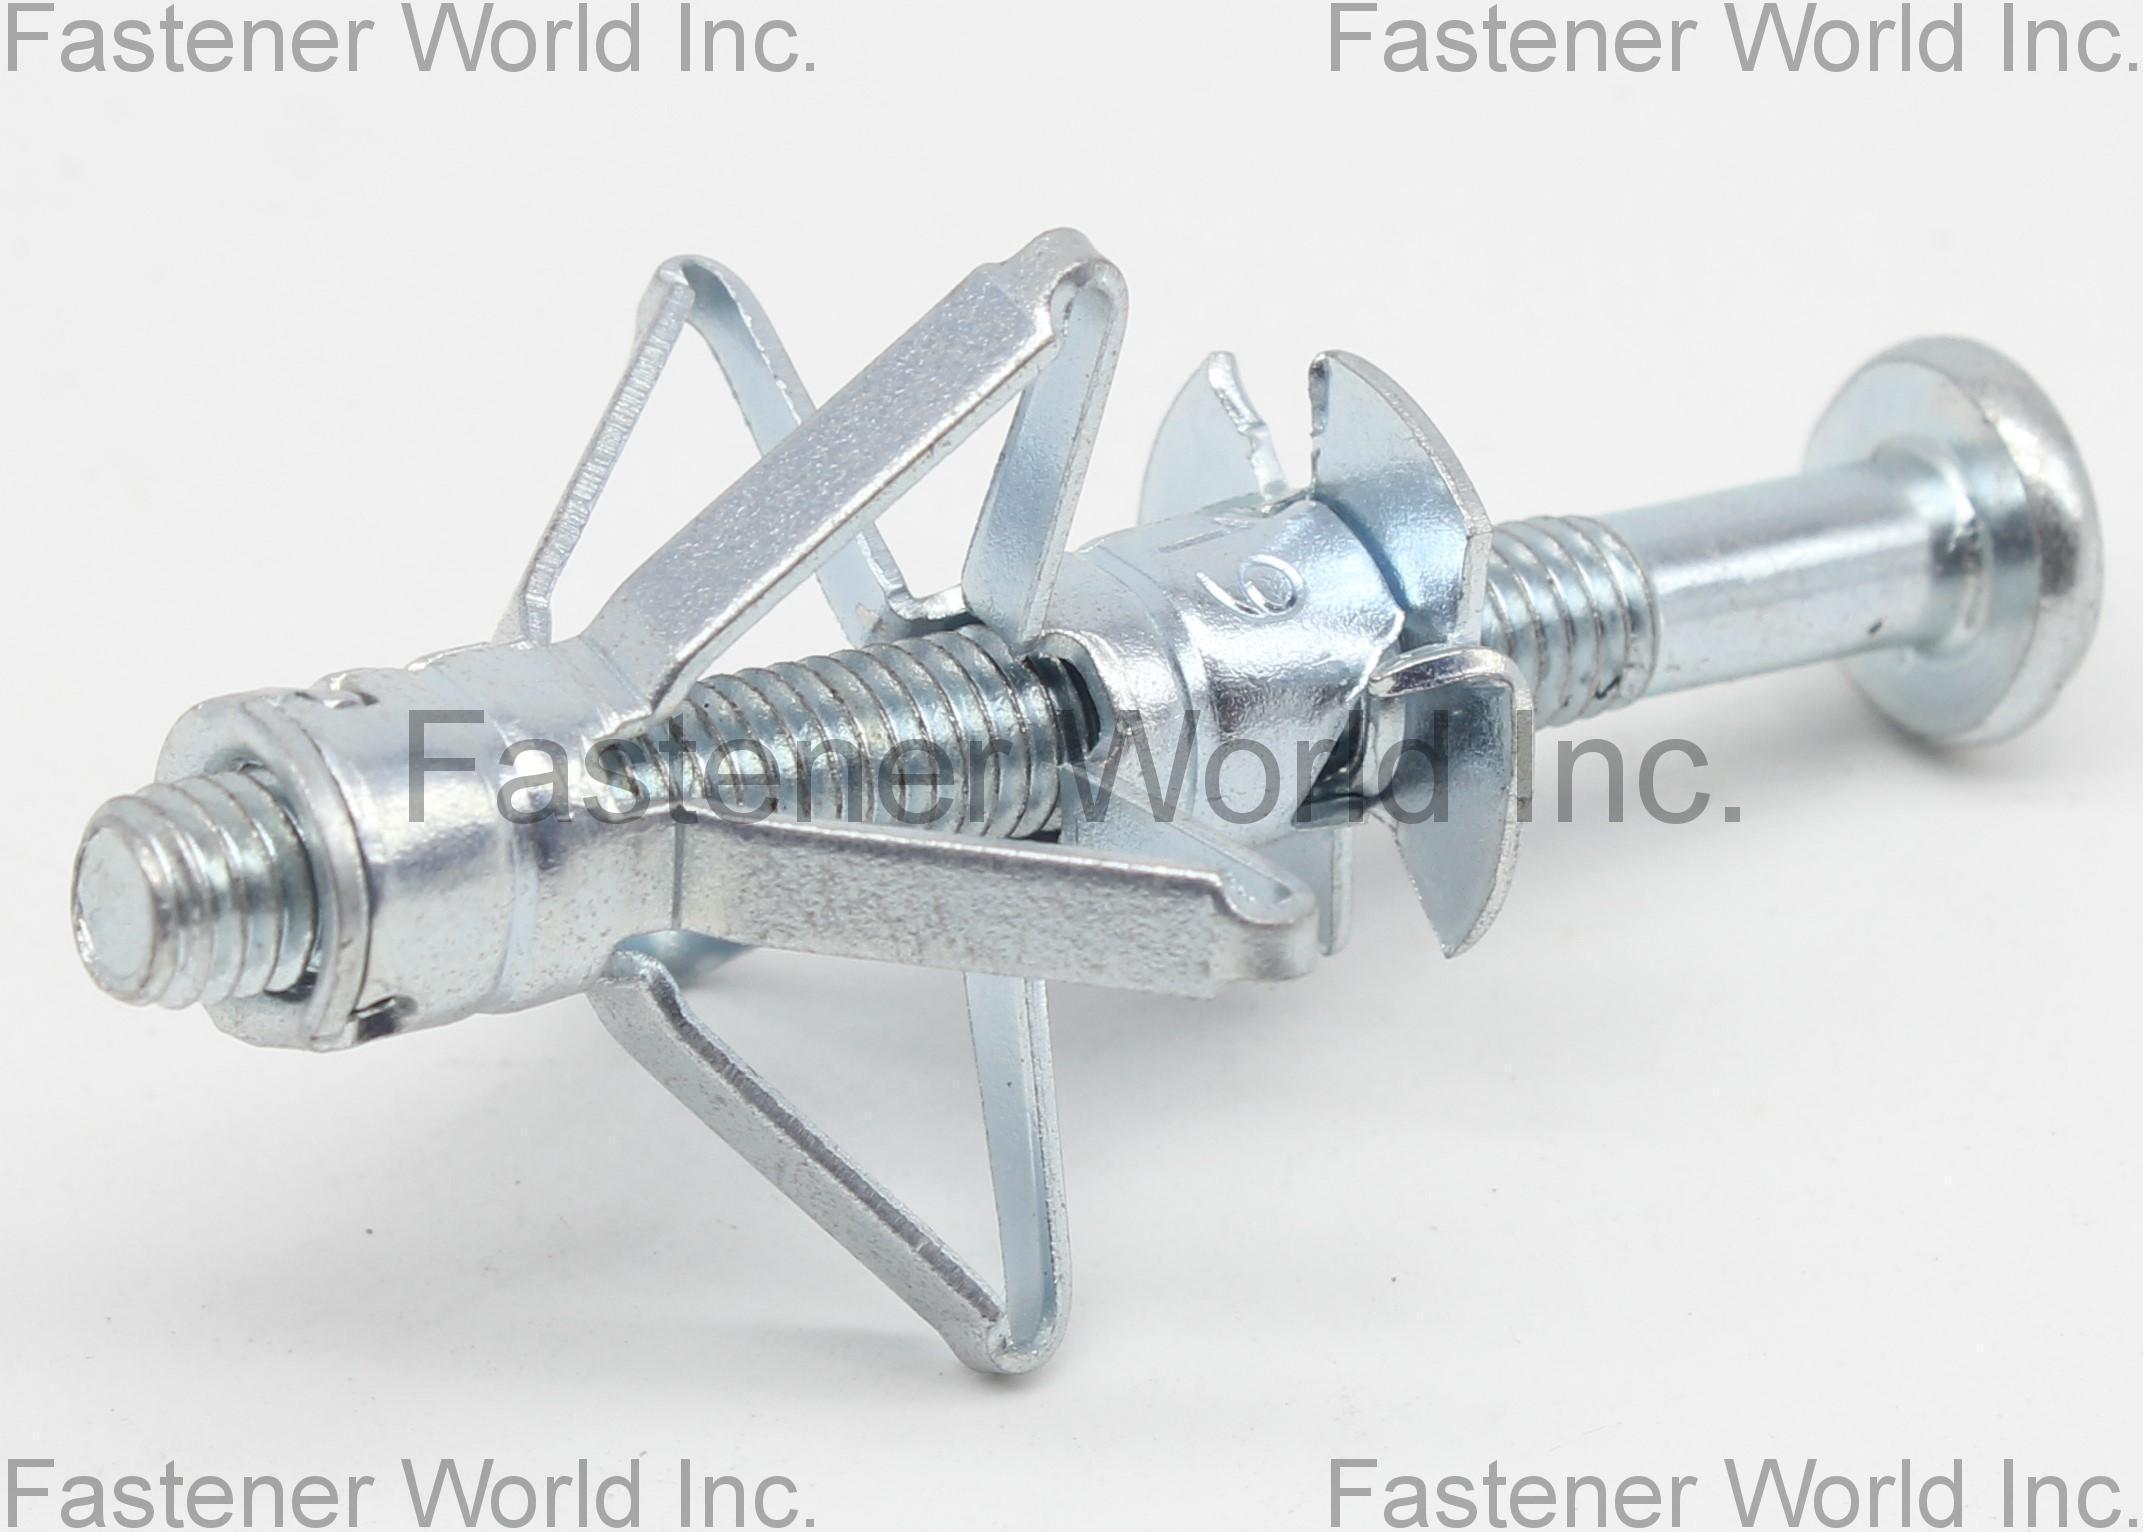 KING CENTURY GROUP CO., LTD. , Hollow Wall Anchors , Hollow Wall Anchors